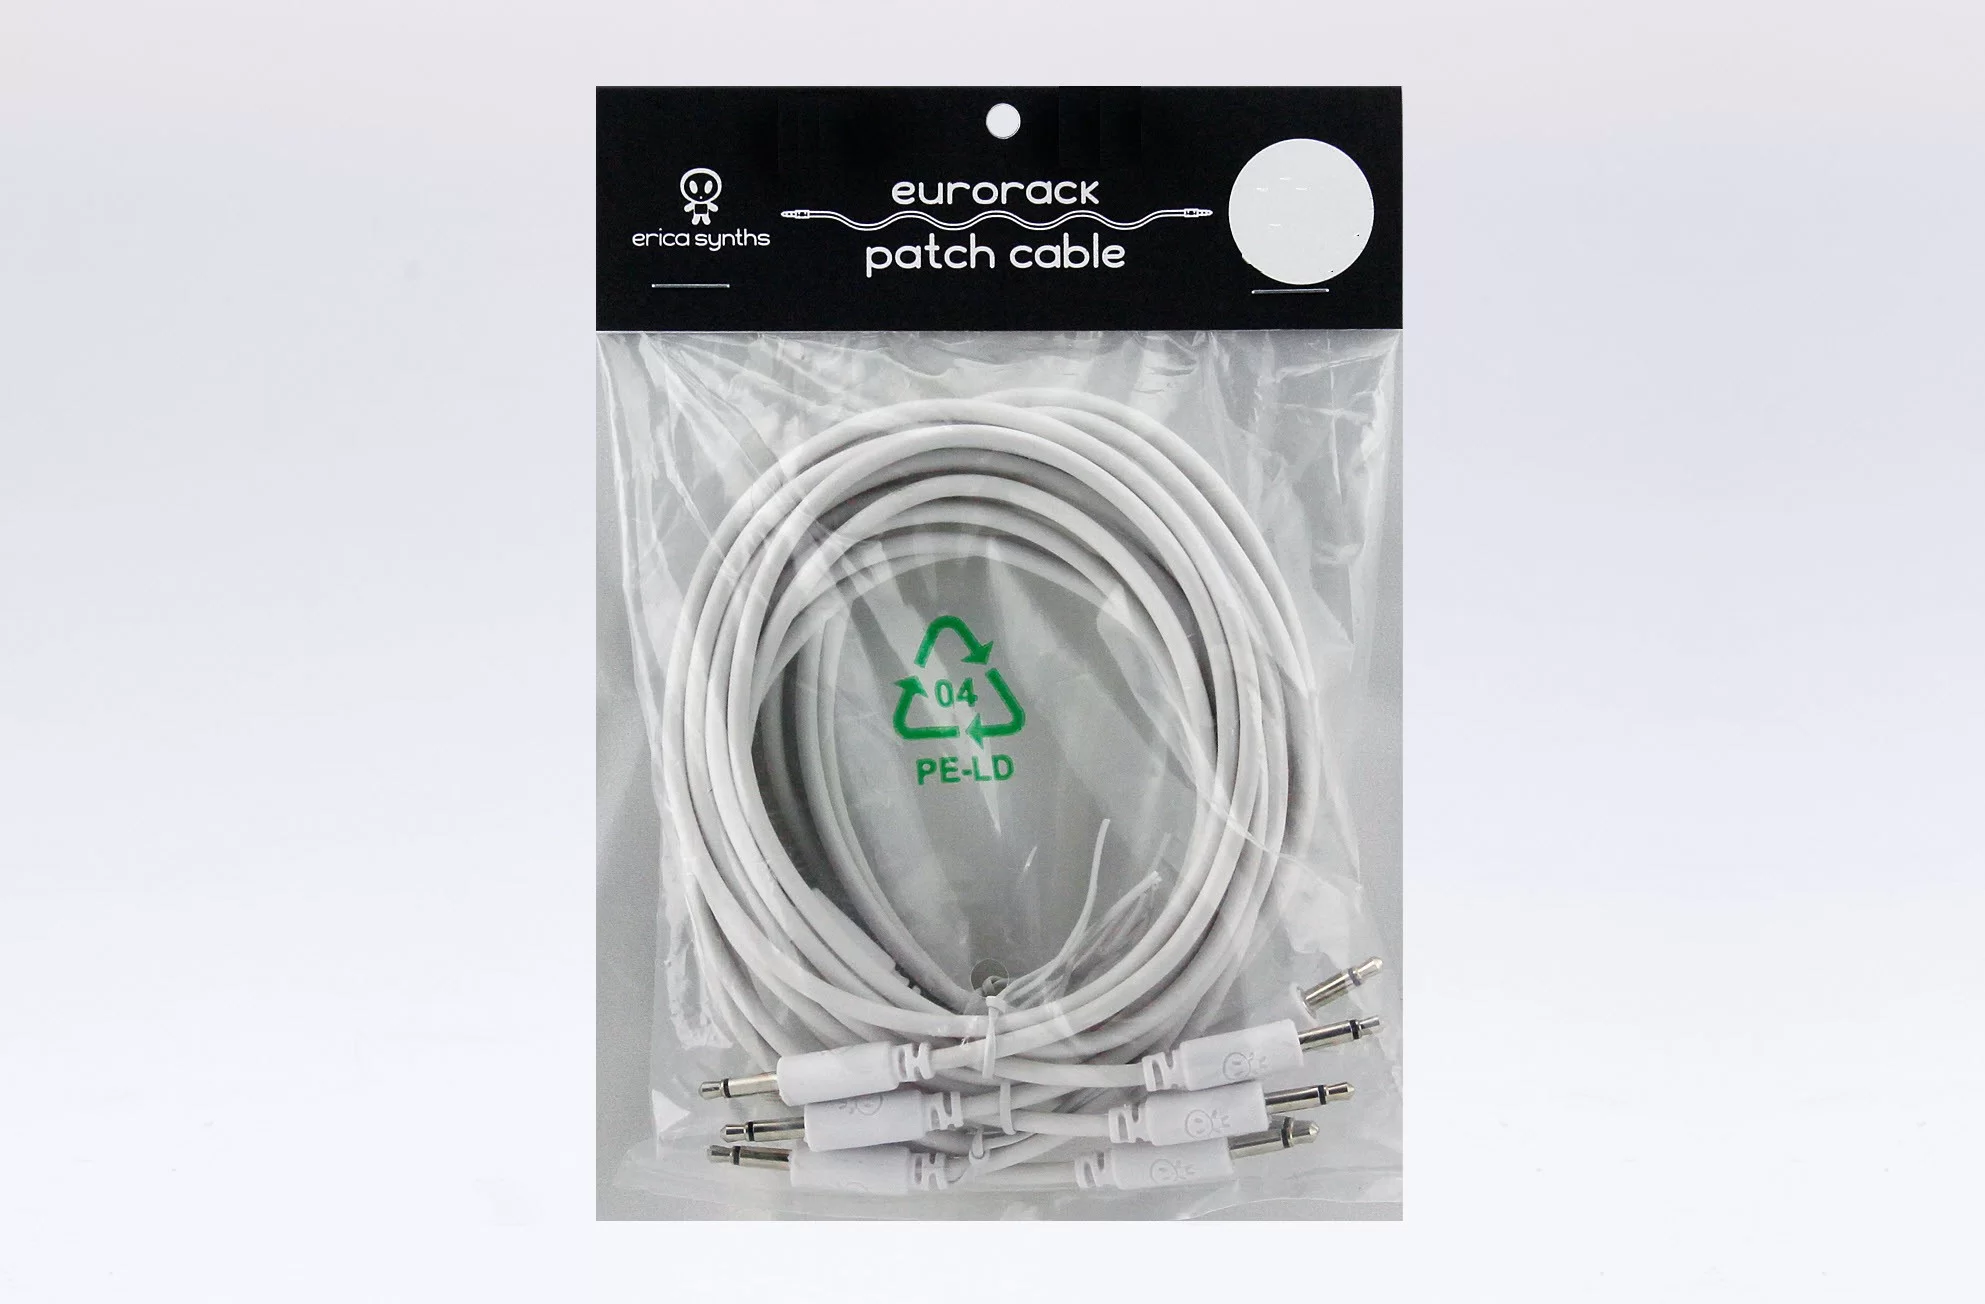 Erica Synths Eurorack patch cables 60cm (5 pcs) - Red